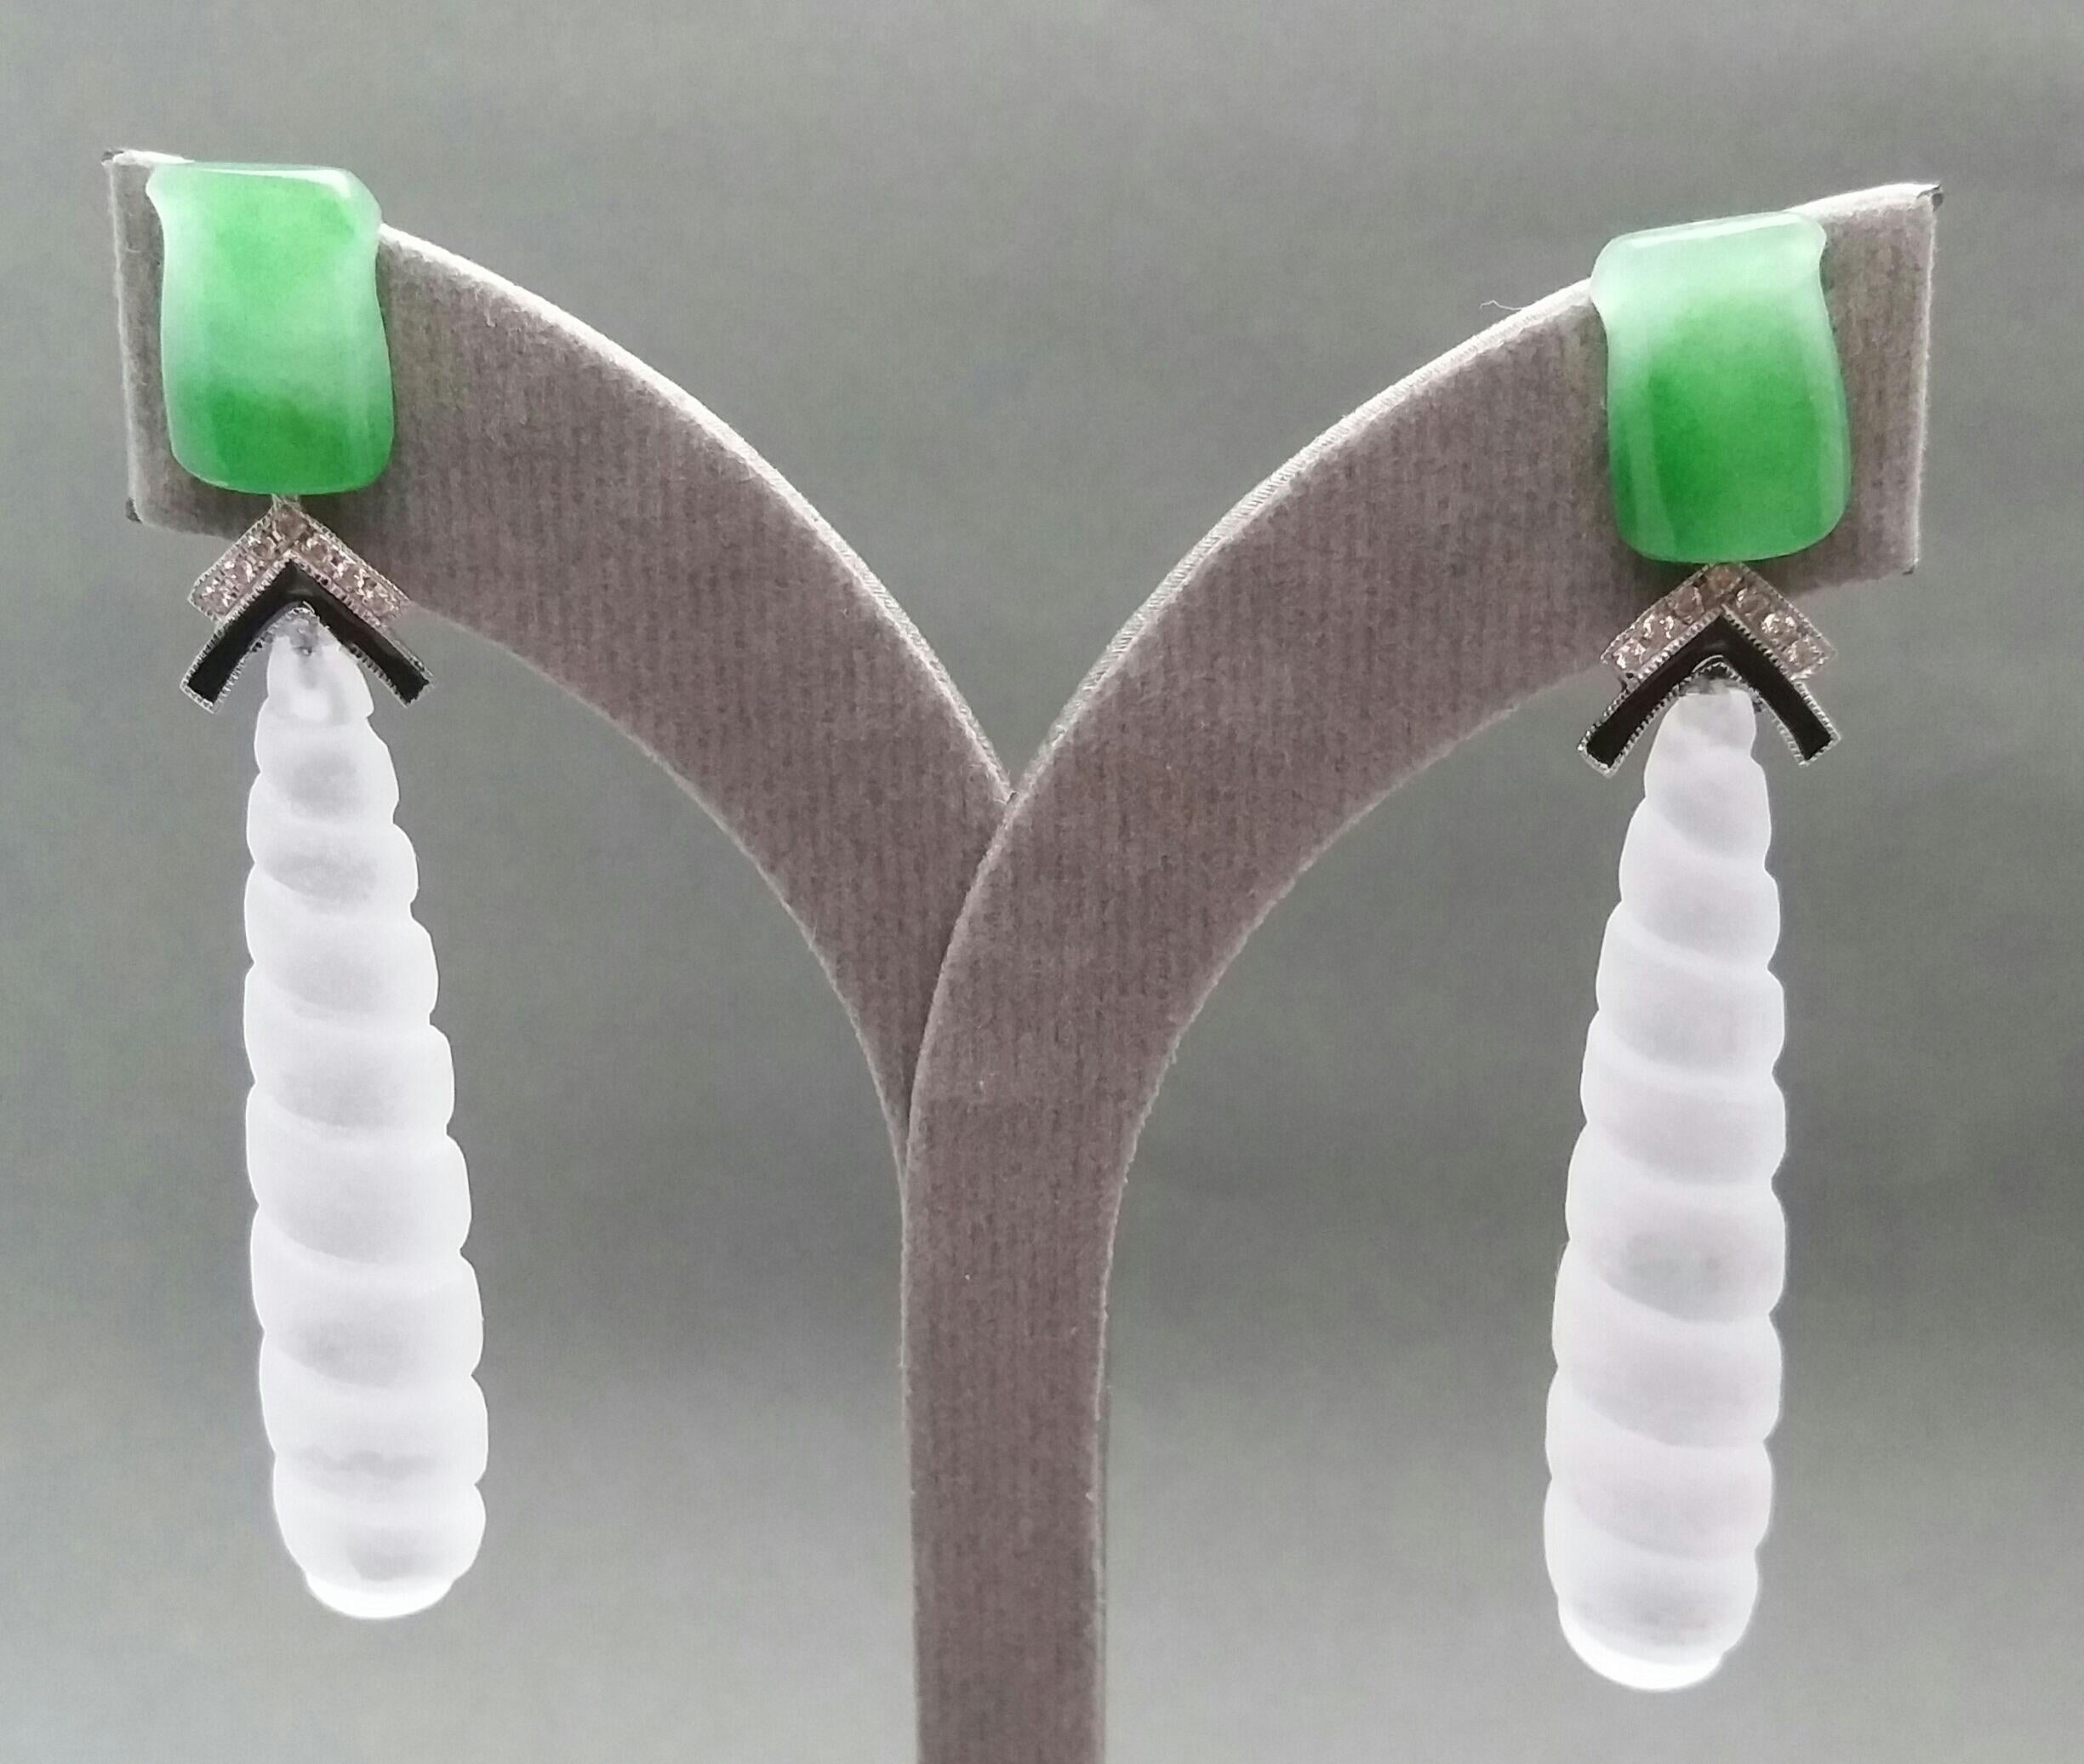 2 Bamboo style carved Jades  are on top, middle parts in white gold ,16 round full cut diamonds,black enamel,2  Rock Crystal  twisted style engraved drops  50 mm long

In 1978 our workshop started in Italy to make simple-chic Art Deco style